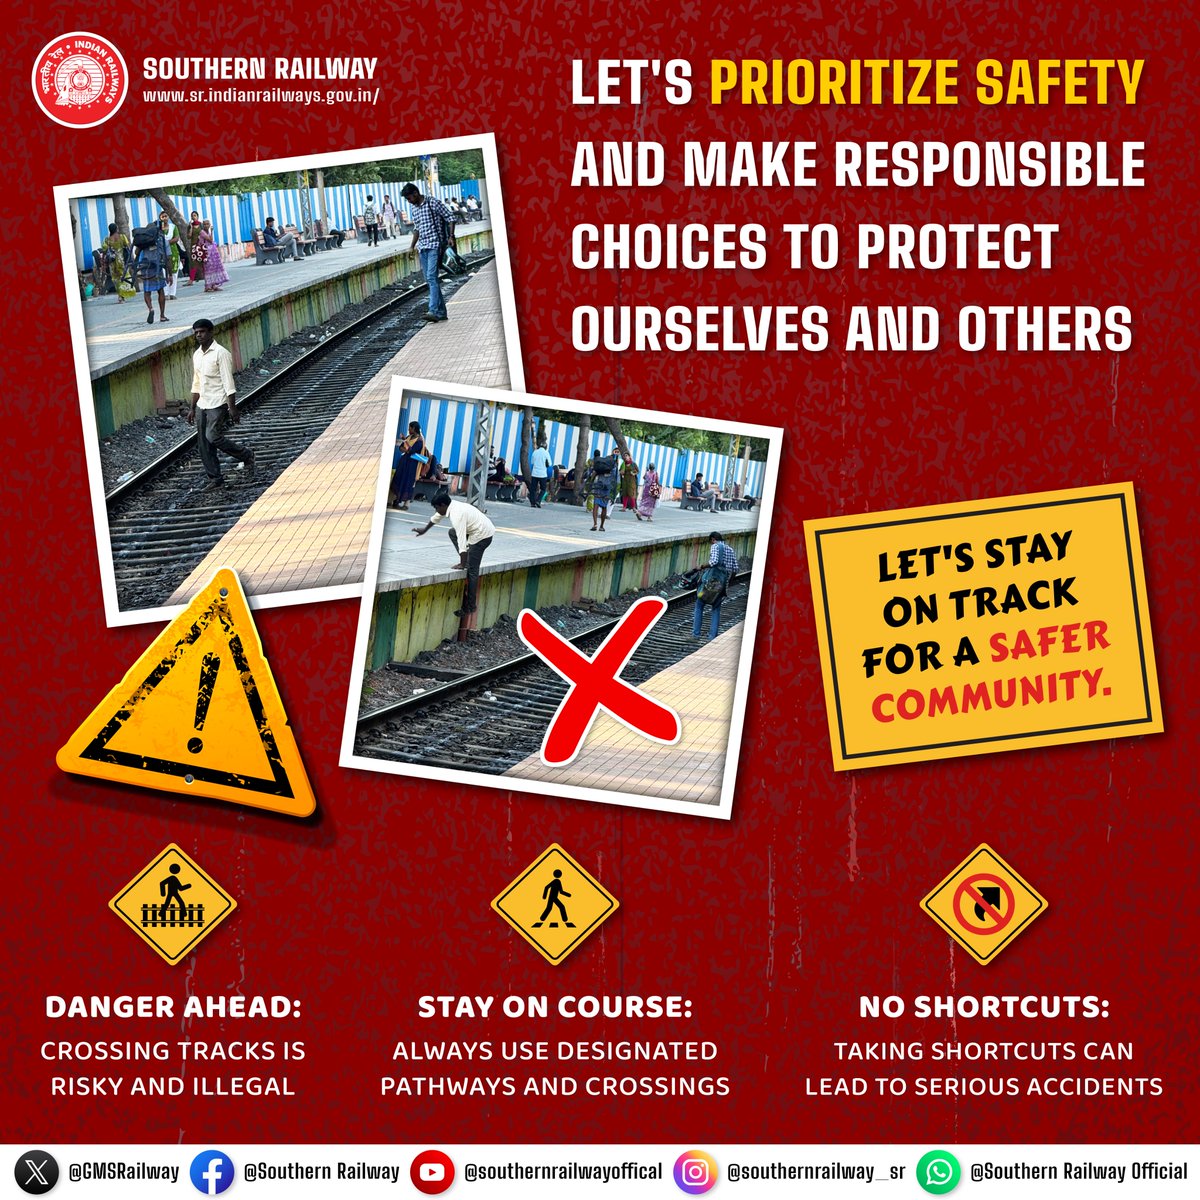 Crossing tracks: A lethal mistake. Embrace safety, use the foot-over bridge, lifts, and escalators instead. Your life matters, so let's make every #journey a safe one #SafetyFirst